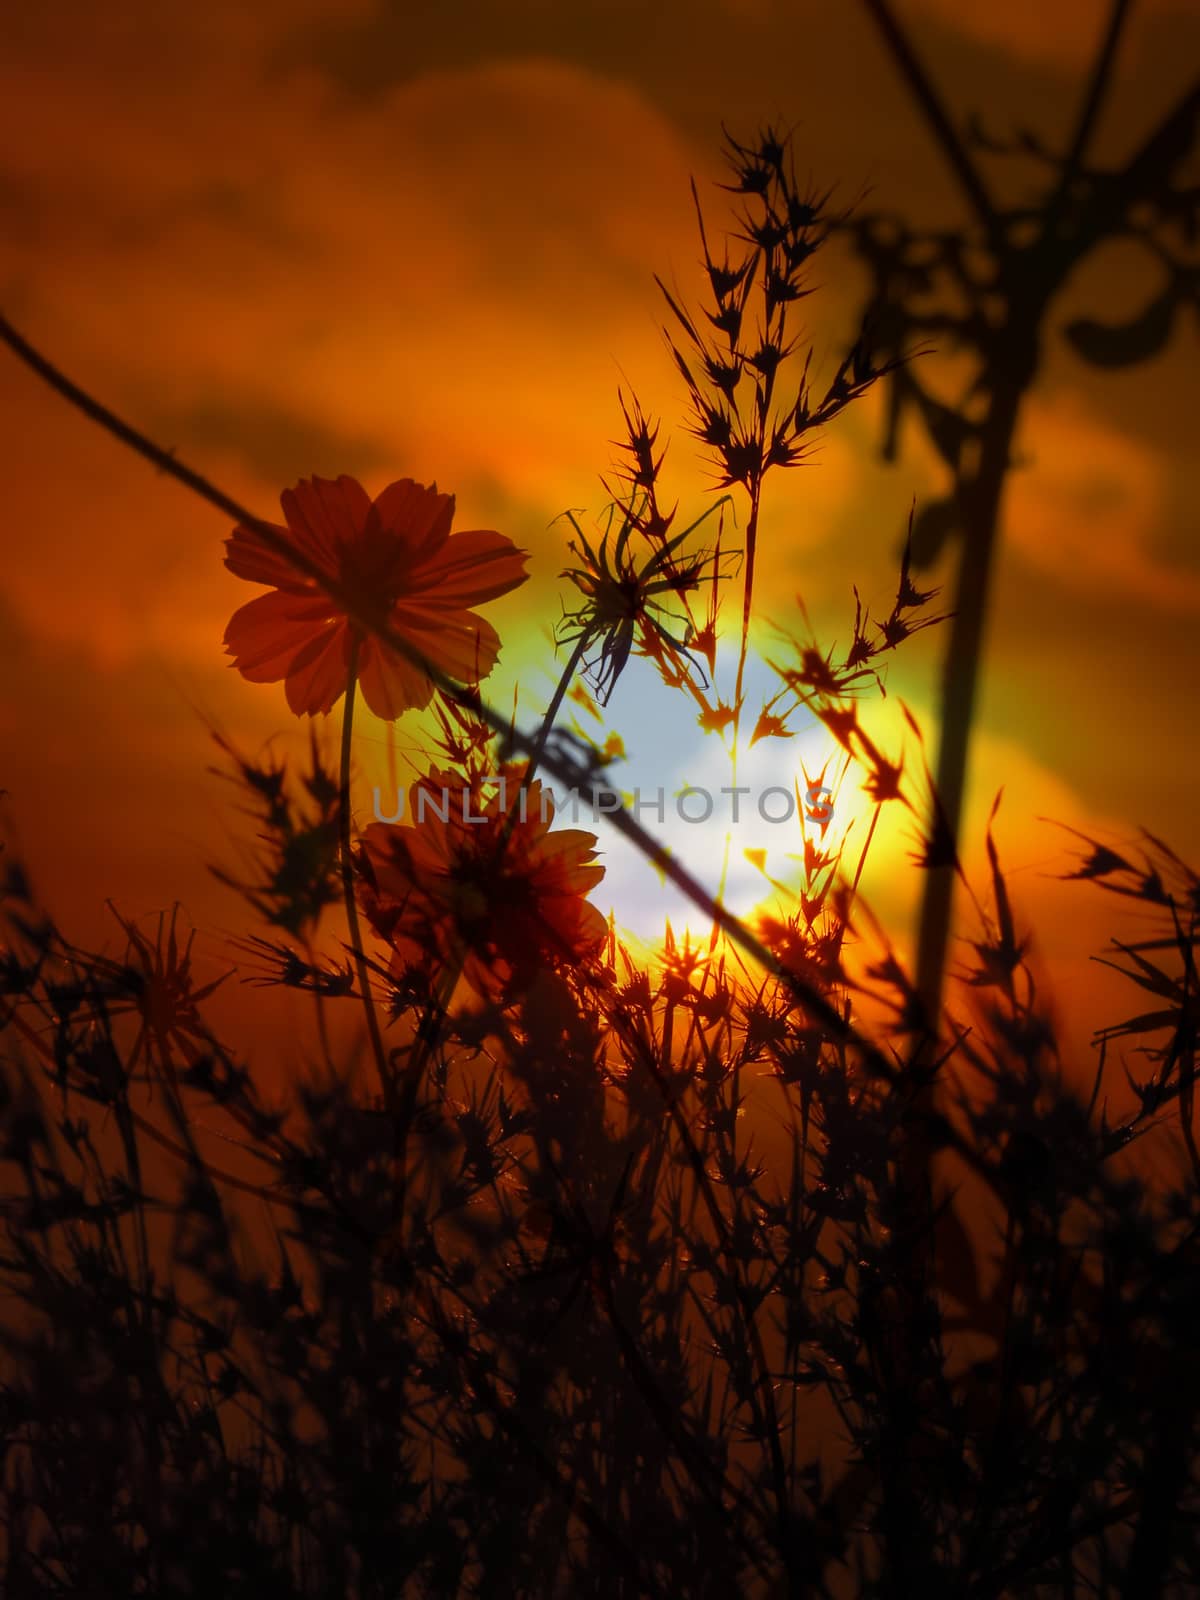 Two flowers in between thorny bushes staring at the setting sun depicting hope and being unique in adverse nature.                               